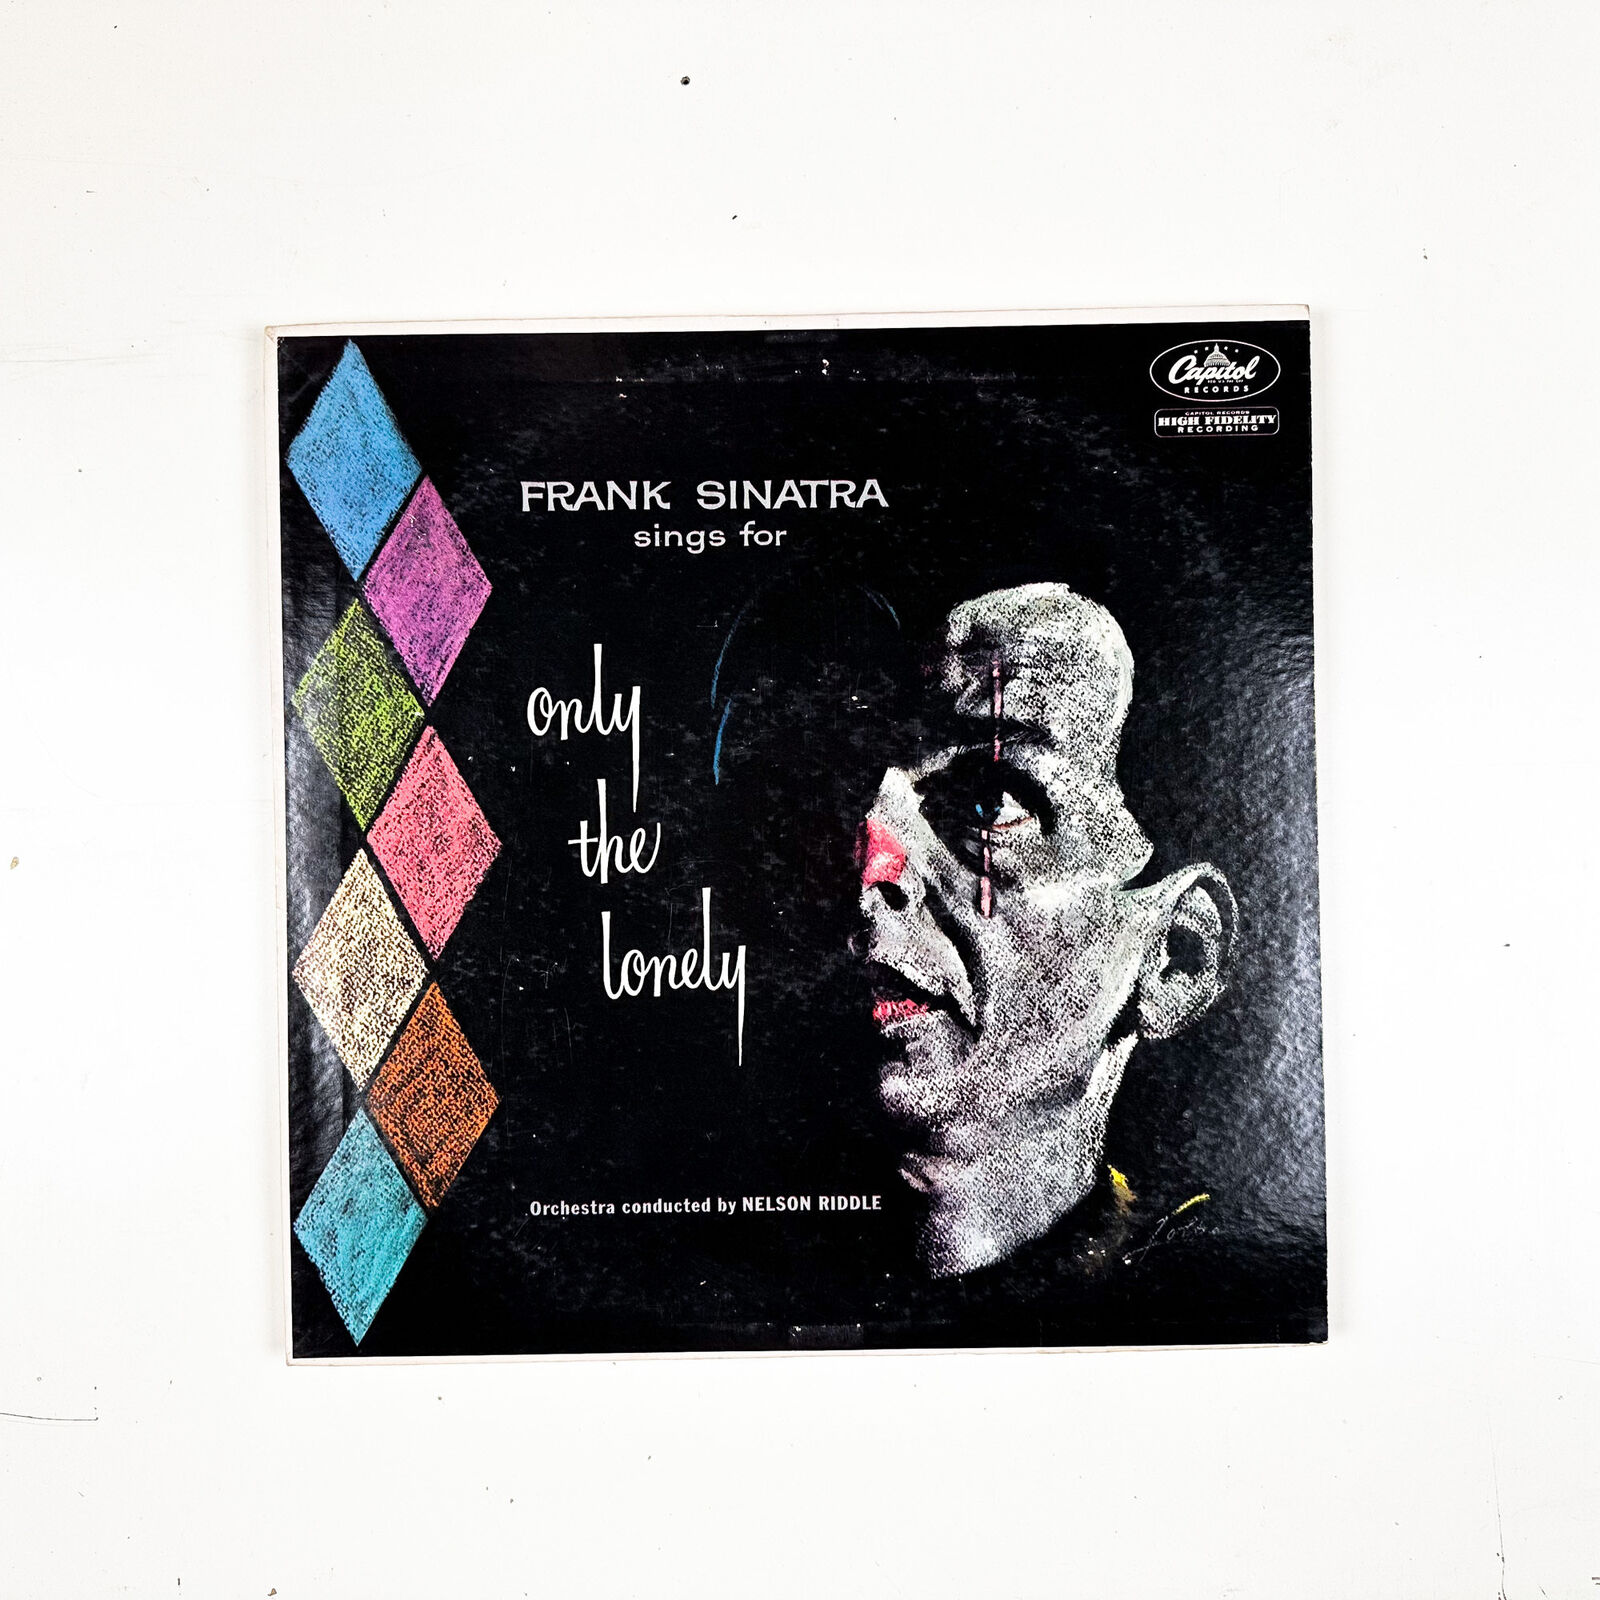 Frank Sinatra - Frank Sinatra Sings For Only The Lonely - Vinyl LP Record - 1959